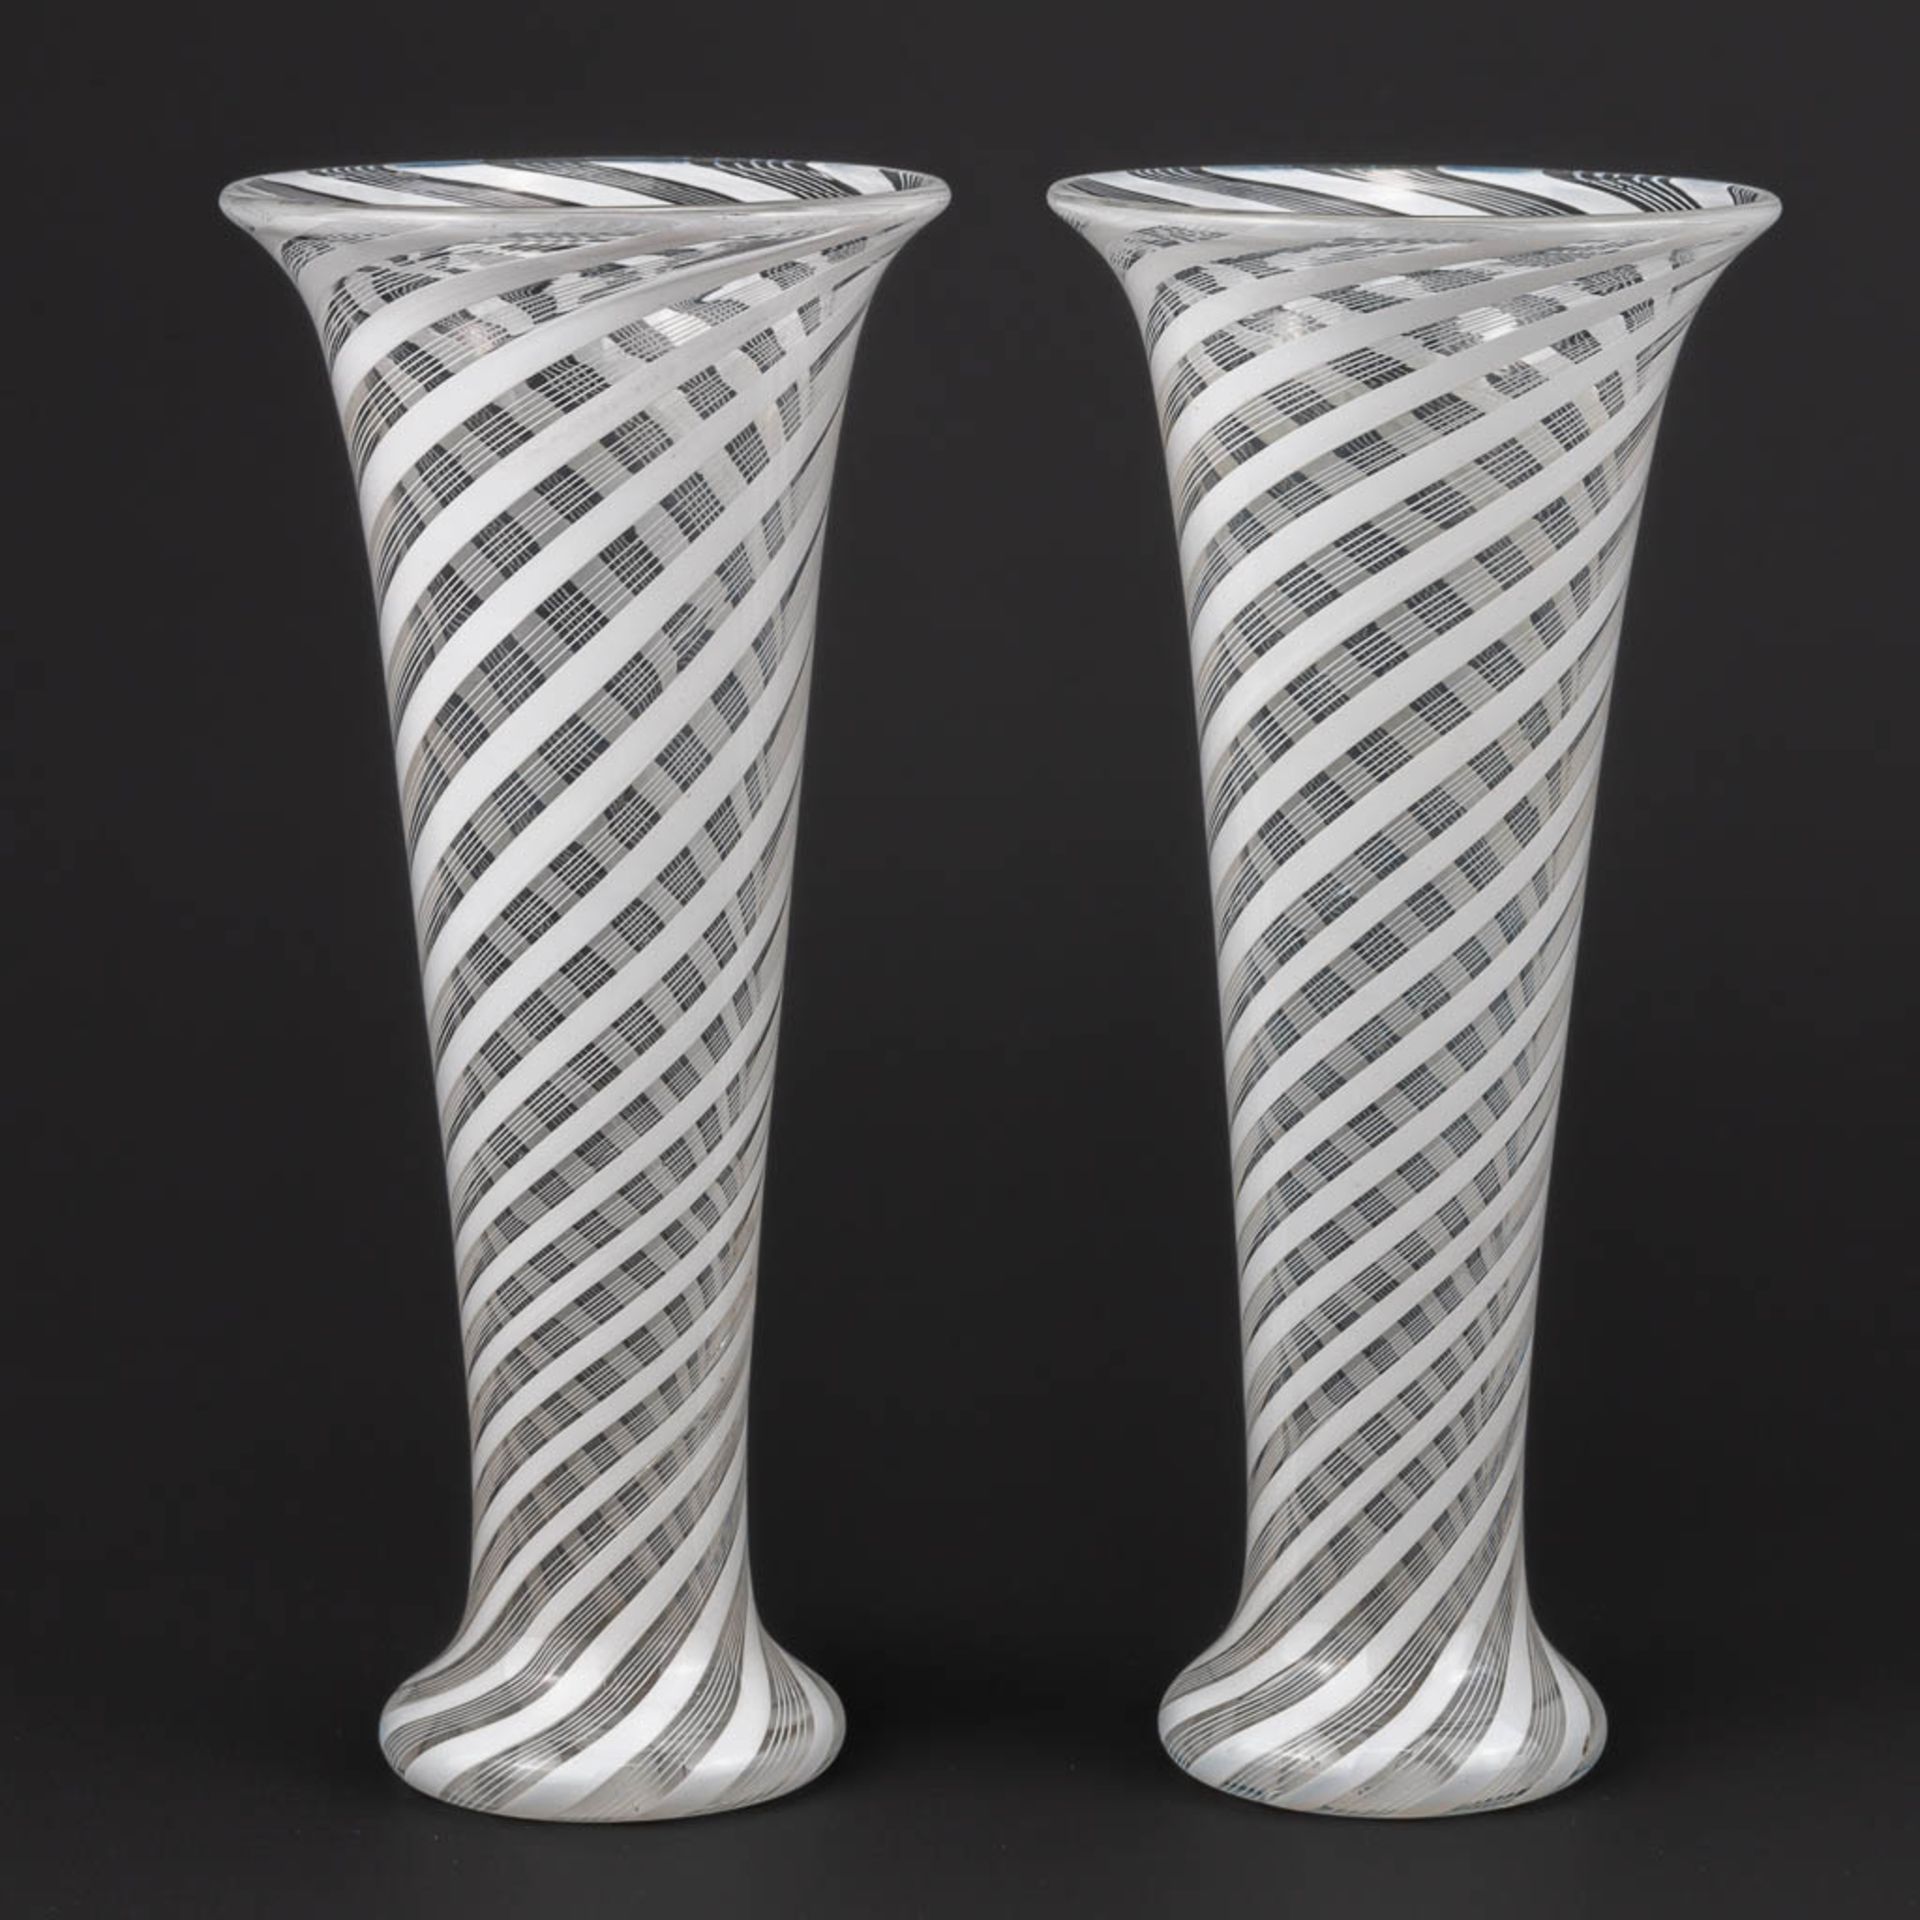 A pair of vases made of glass in Murano, Italy, around 1900. (16 x 7 cm) - Image 2 of 11